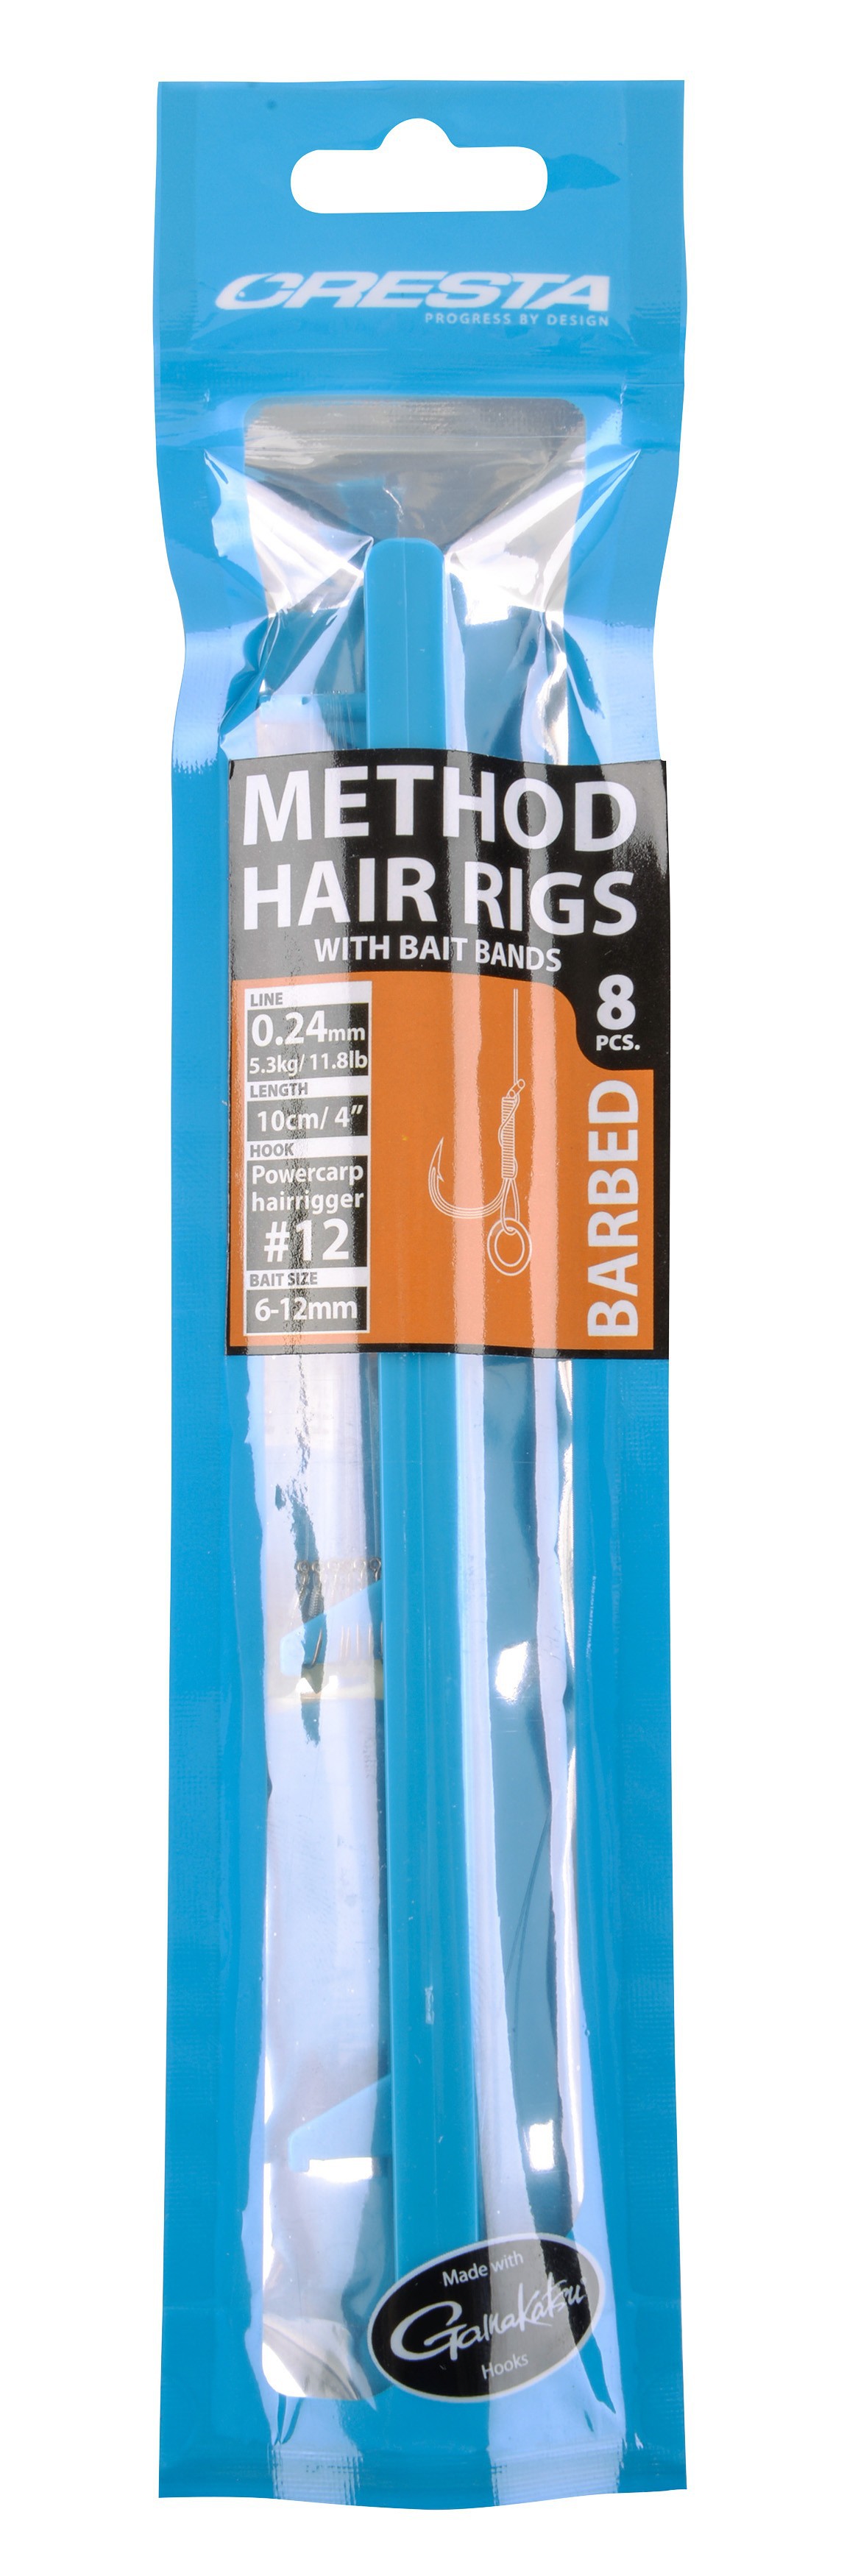 Spro - Cresta Method Hair Rigs With Bait Bands Barbed 4" – 10 cm Size 14